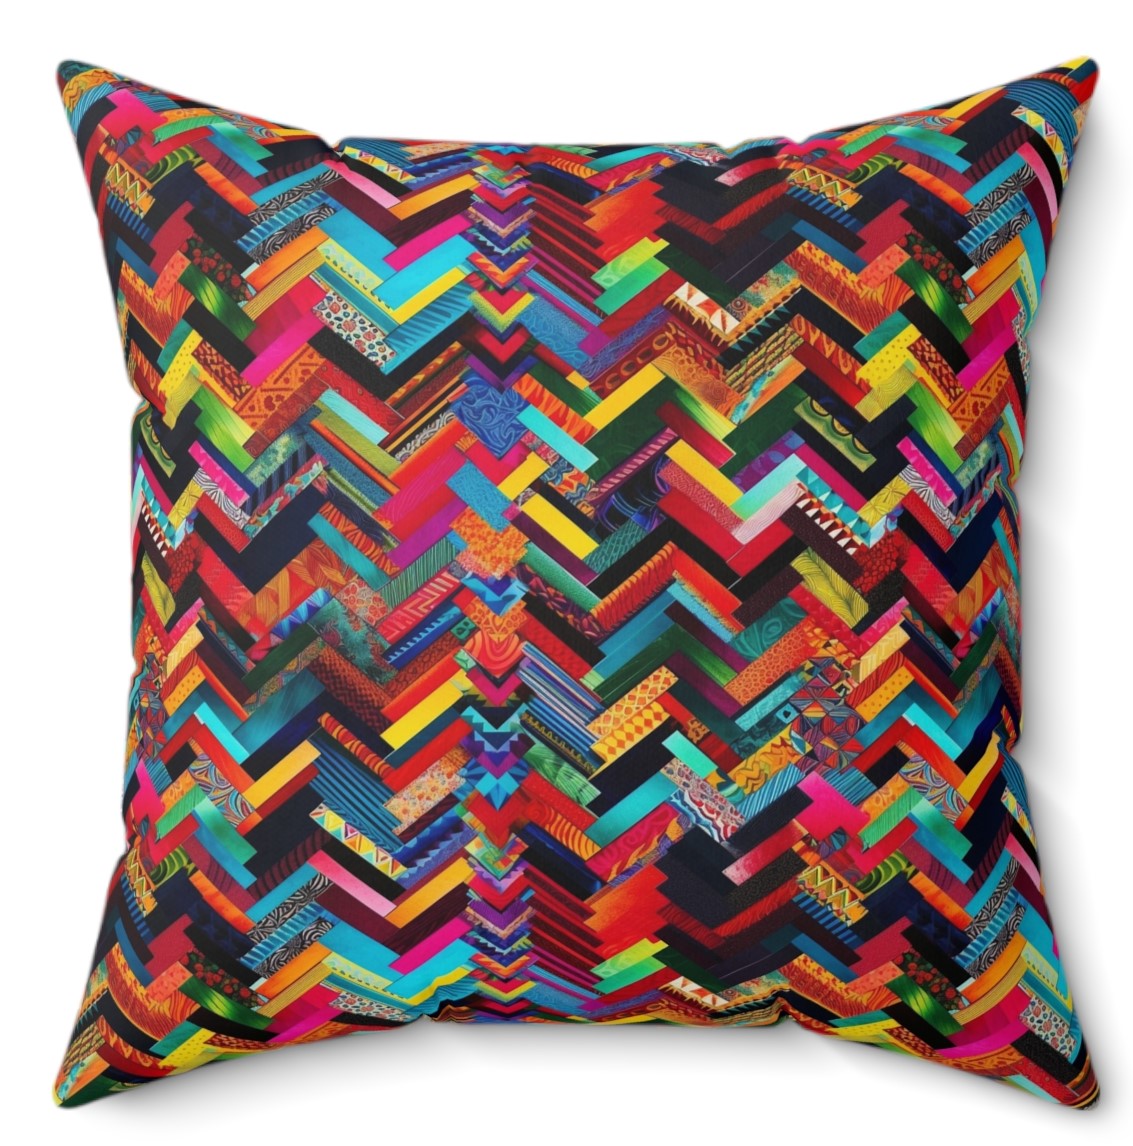 Close-up of the Ugandan Chevron Print Pillow, showcasing the intricate and eye-catching chevron pattern inspired by Ugandan traditions.